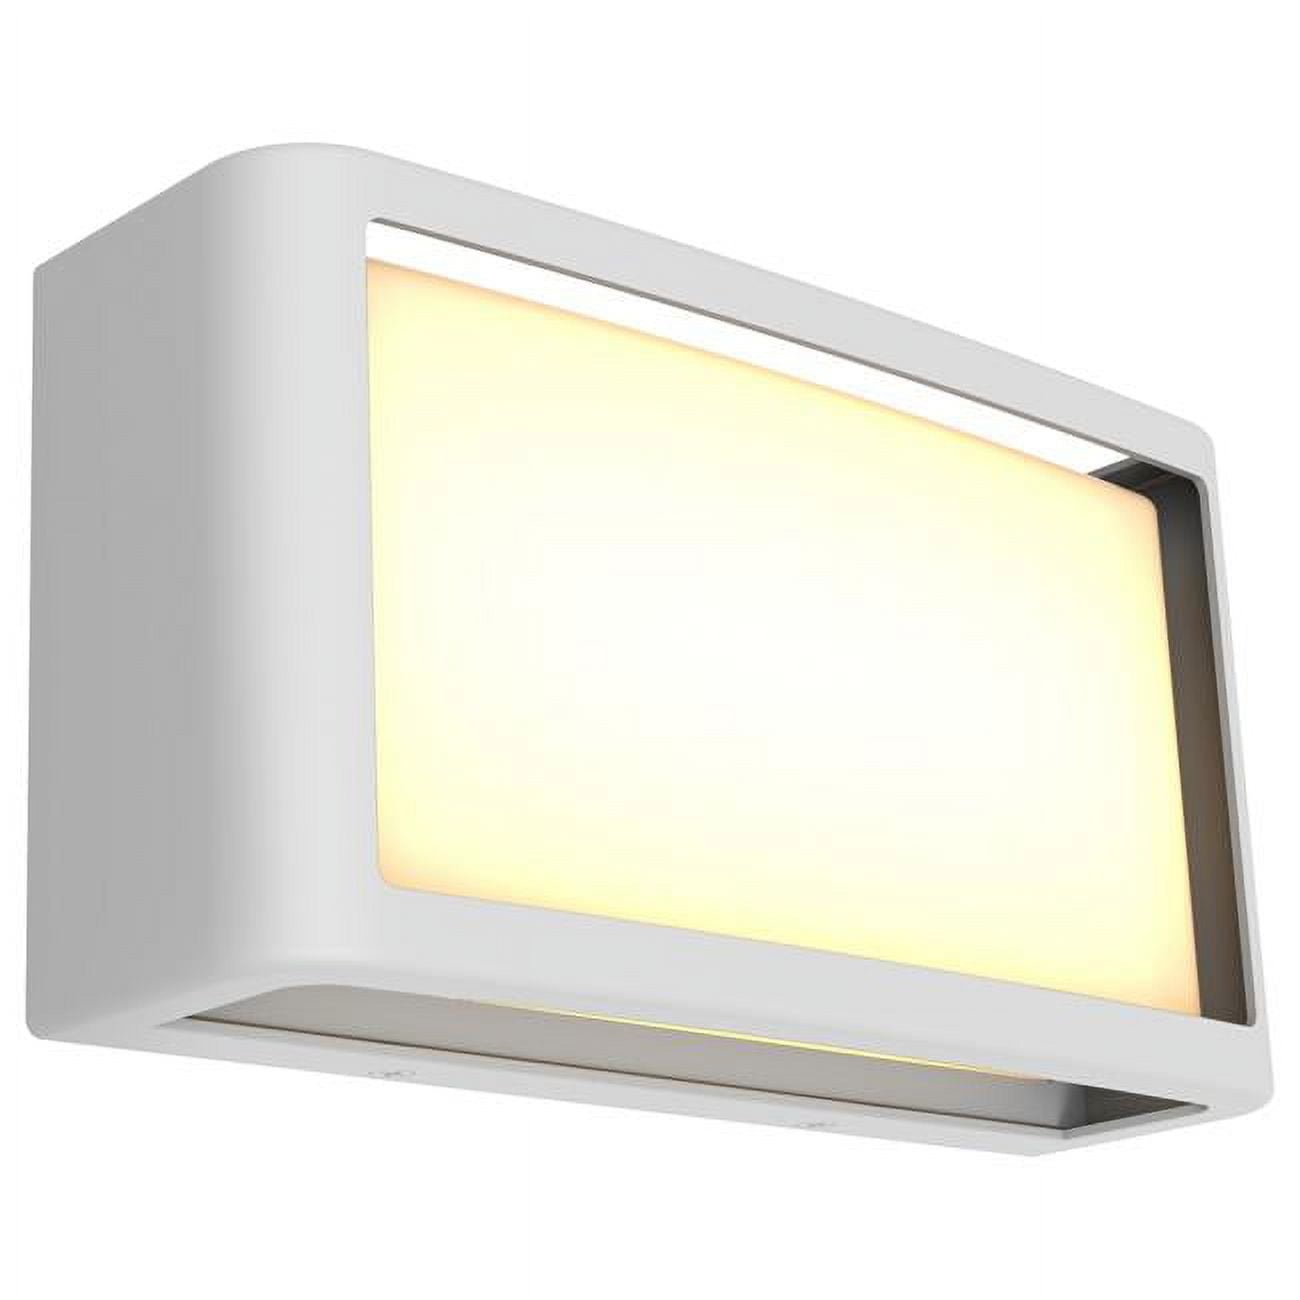 Picture of Access Lighting 20023LEDDMG-WH-ACR 9 in. Malibu Outdoor LED Light Wall Mount, White